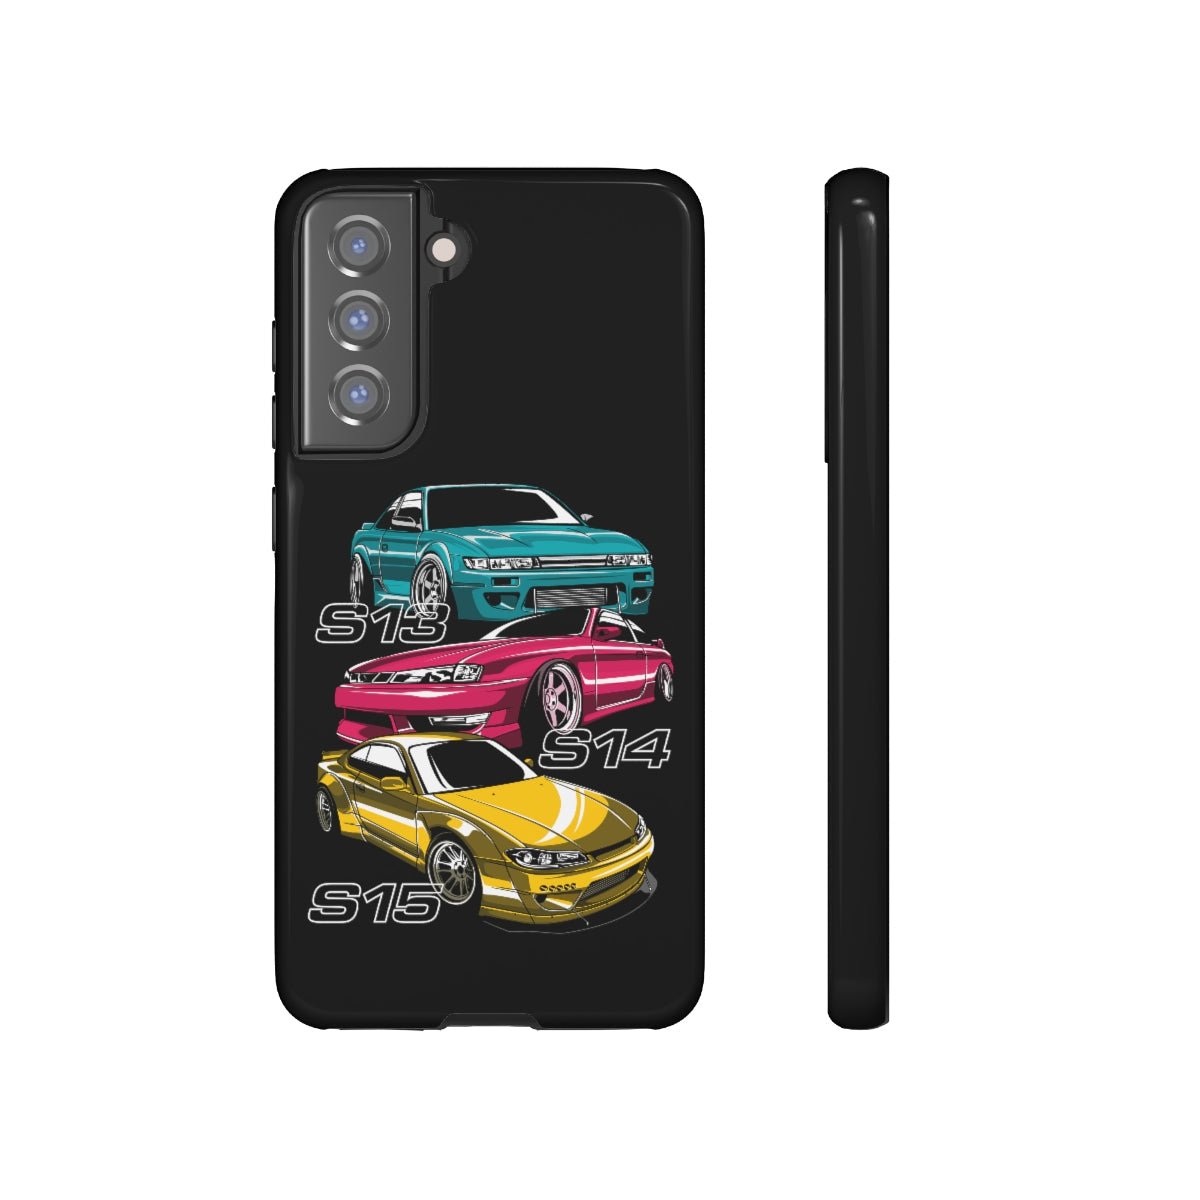 S Chassis Generation - Car Phone Case - Samsung Galaxy S21 FE